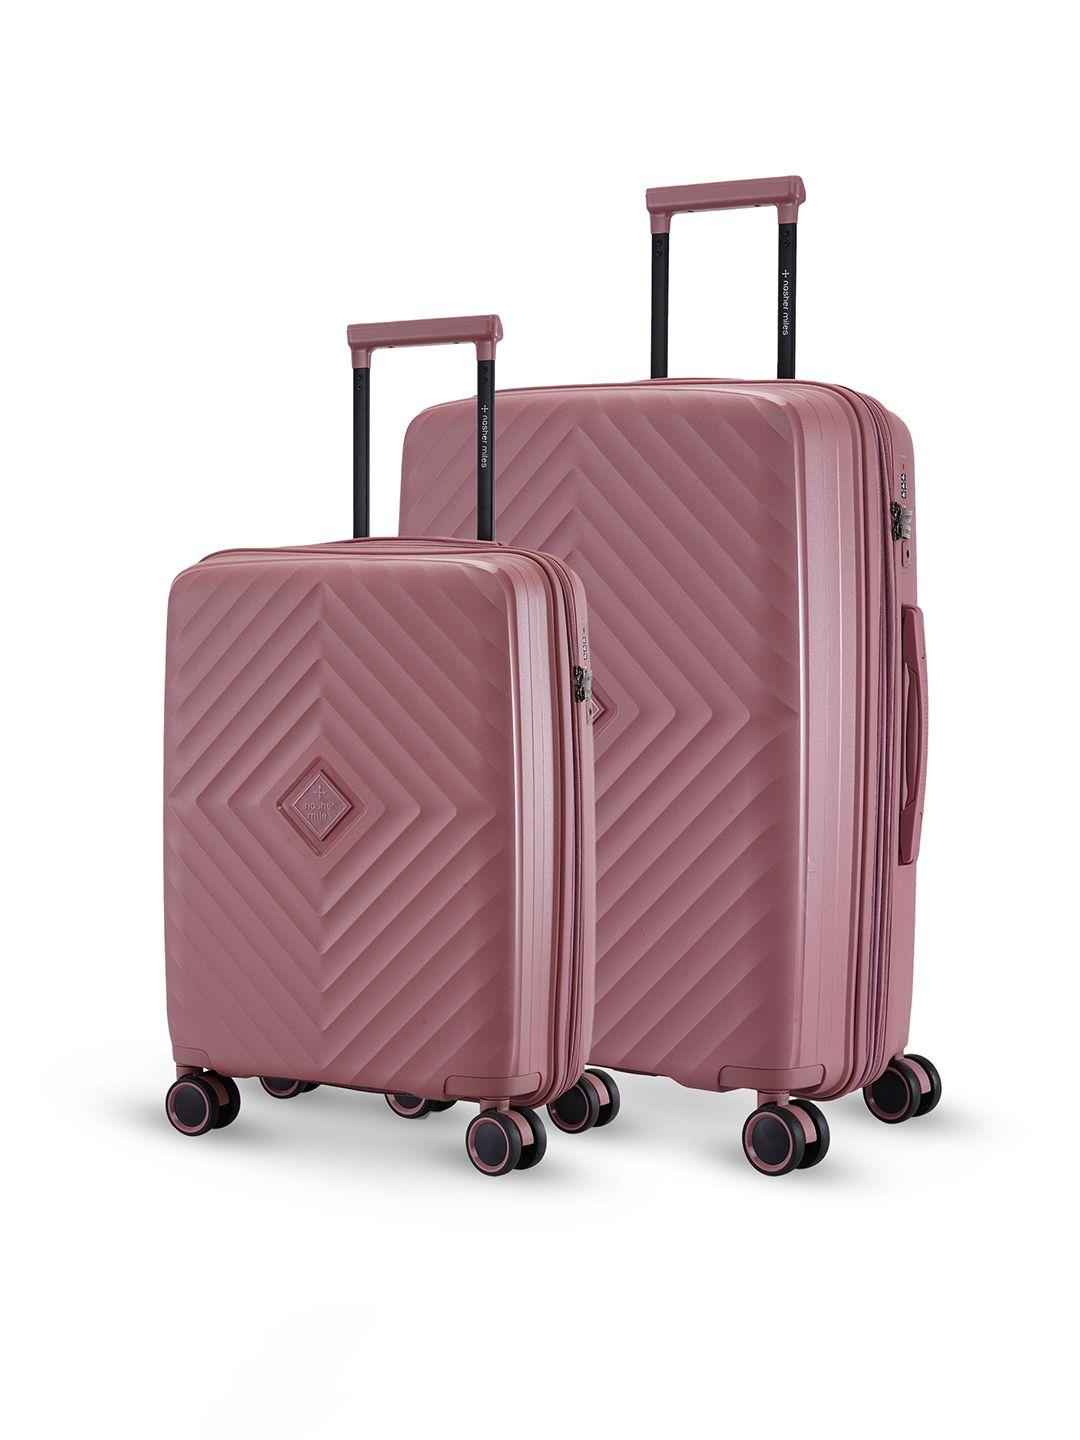 nasher miles set of 2 hard-sided textured trolley suitcases